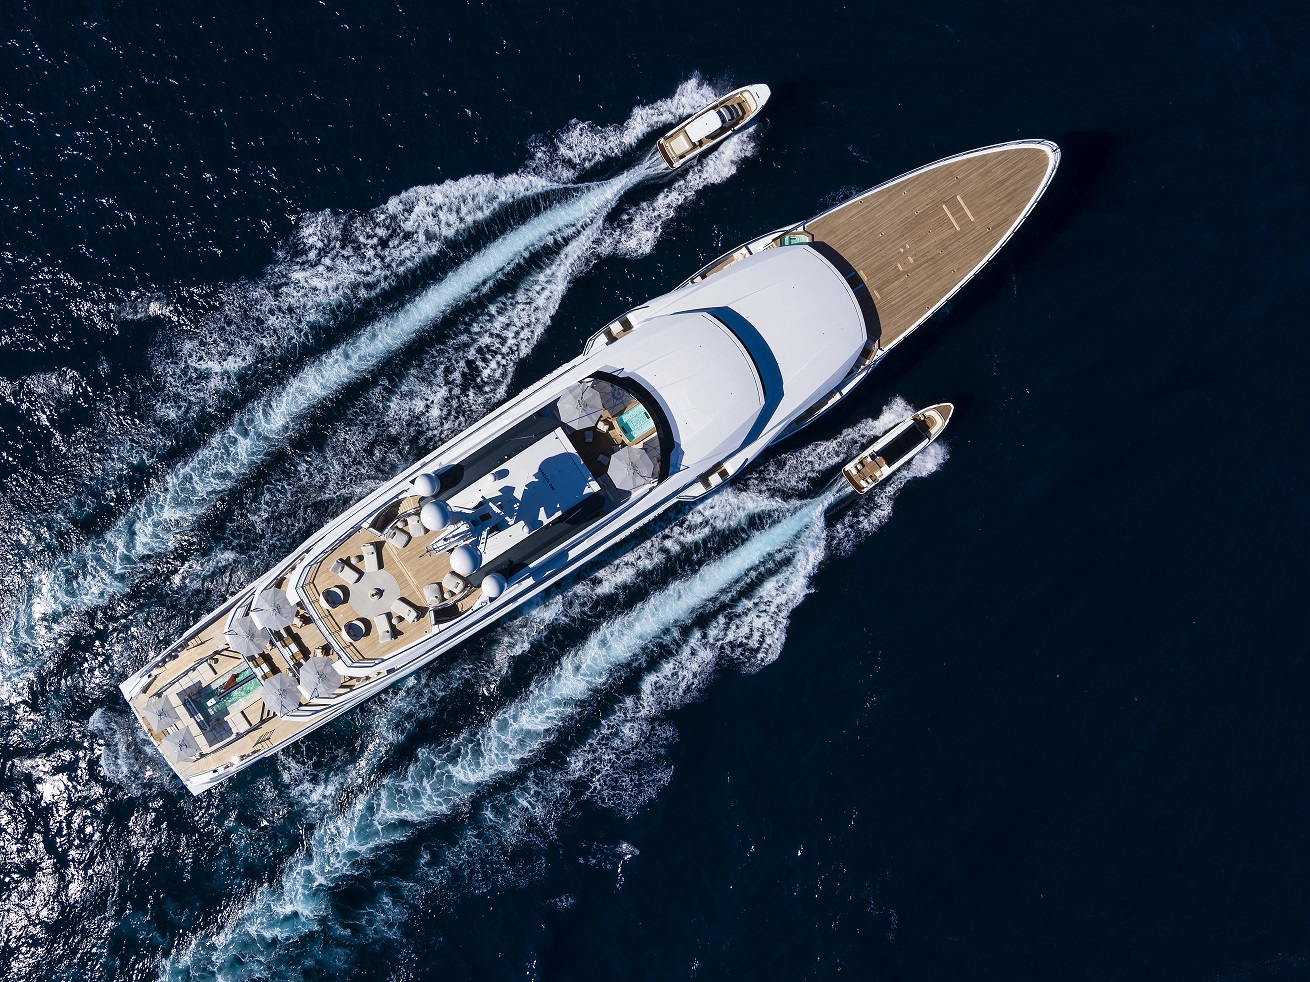 DreAMboat – what superyachts dreams are made of!